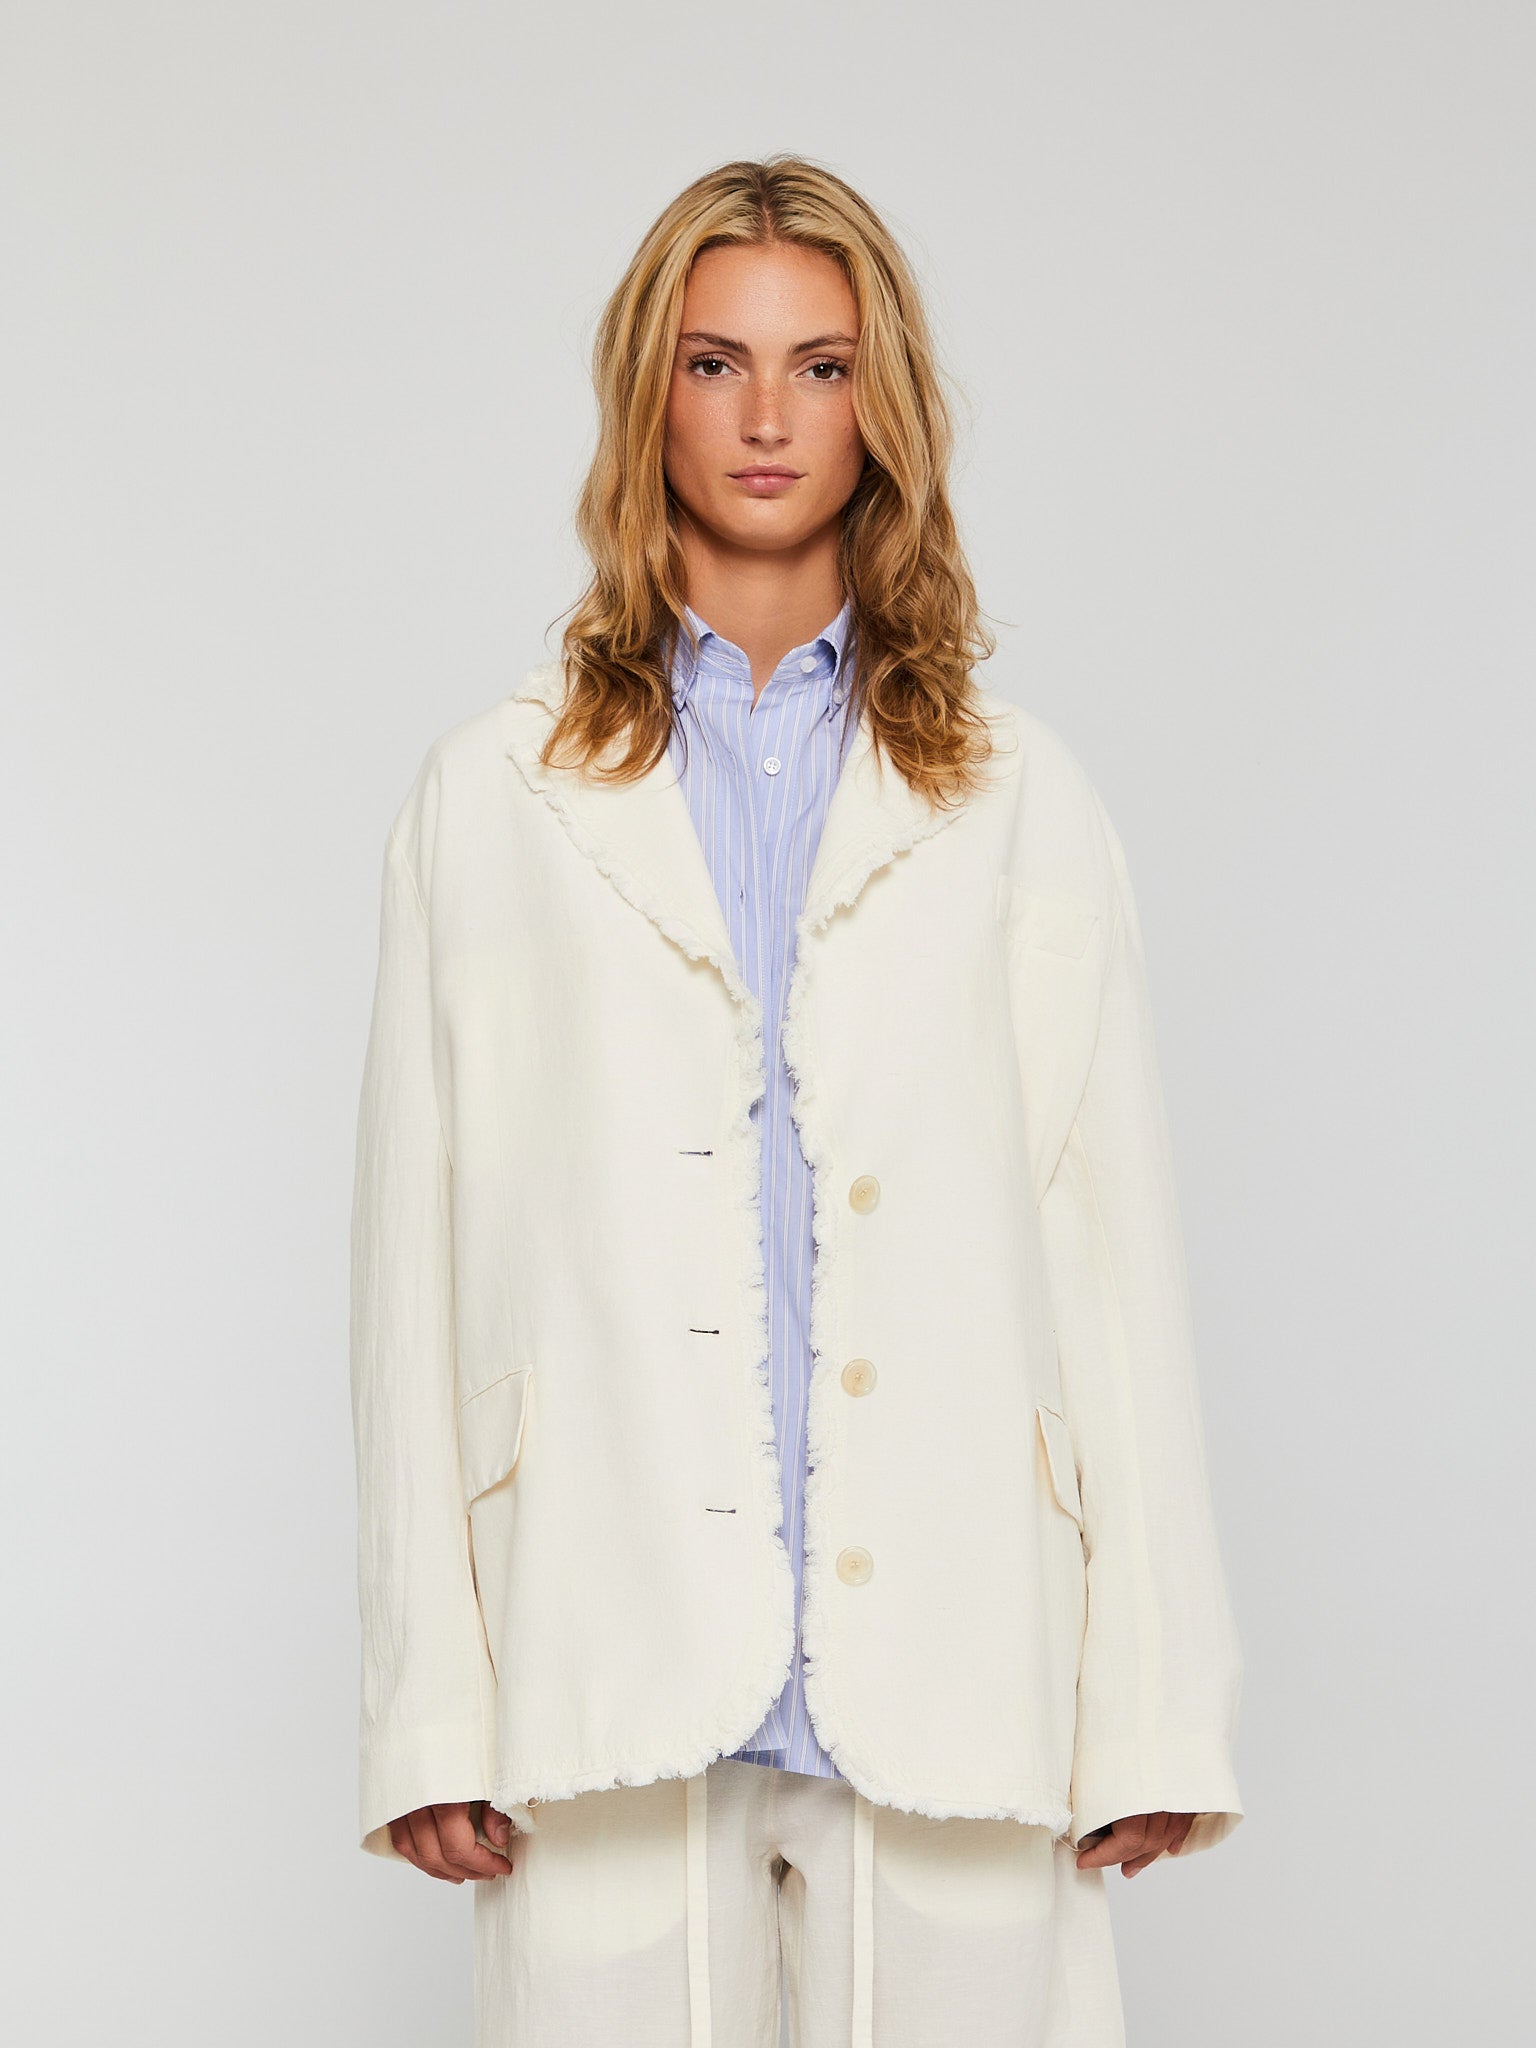 Acne Studios - Single-breasted Suit Jacket in Warm White